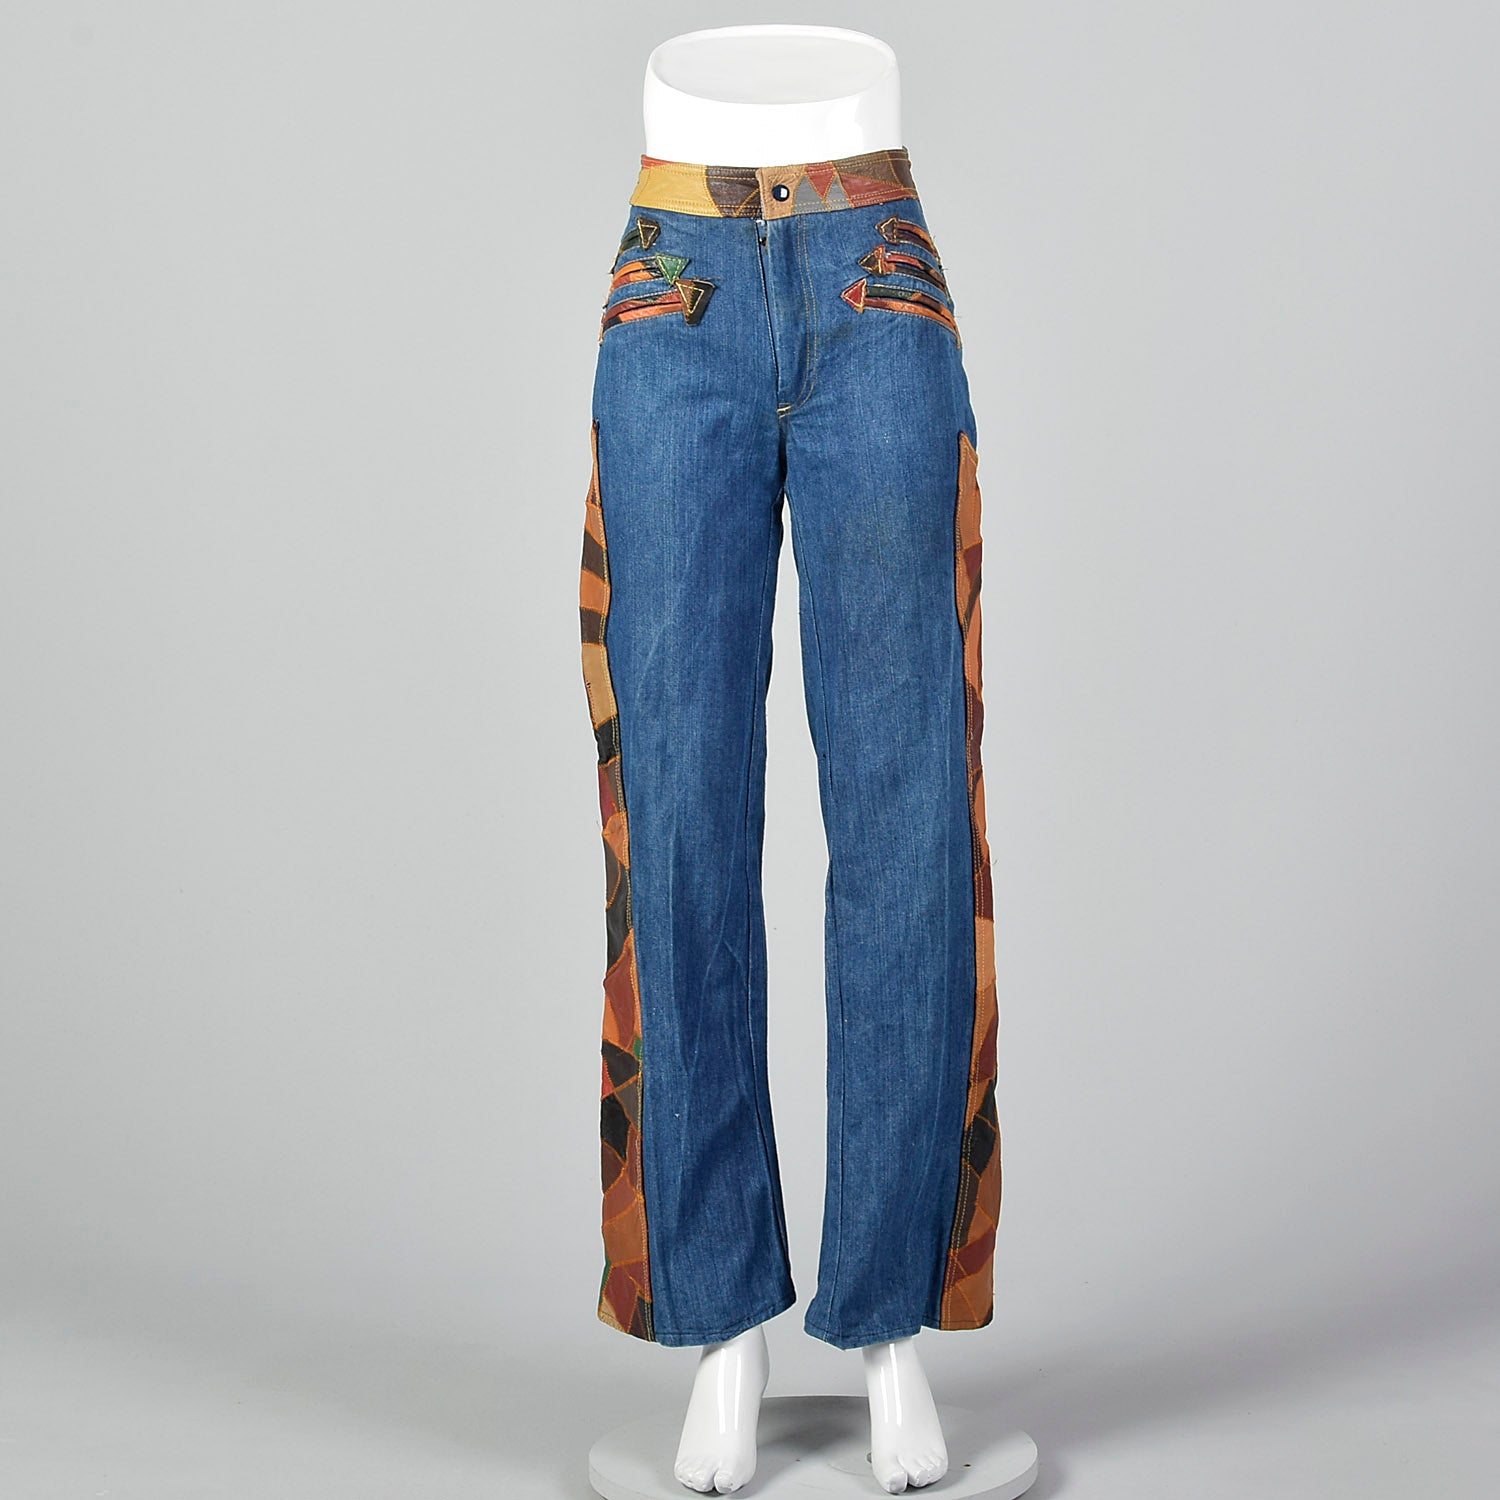 Small 1970s Patchwork Leather Denim Bellbottoms